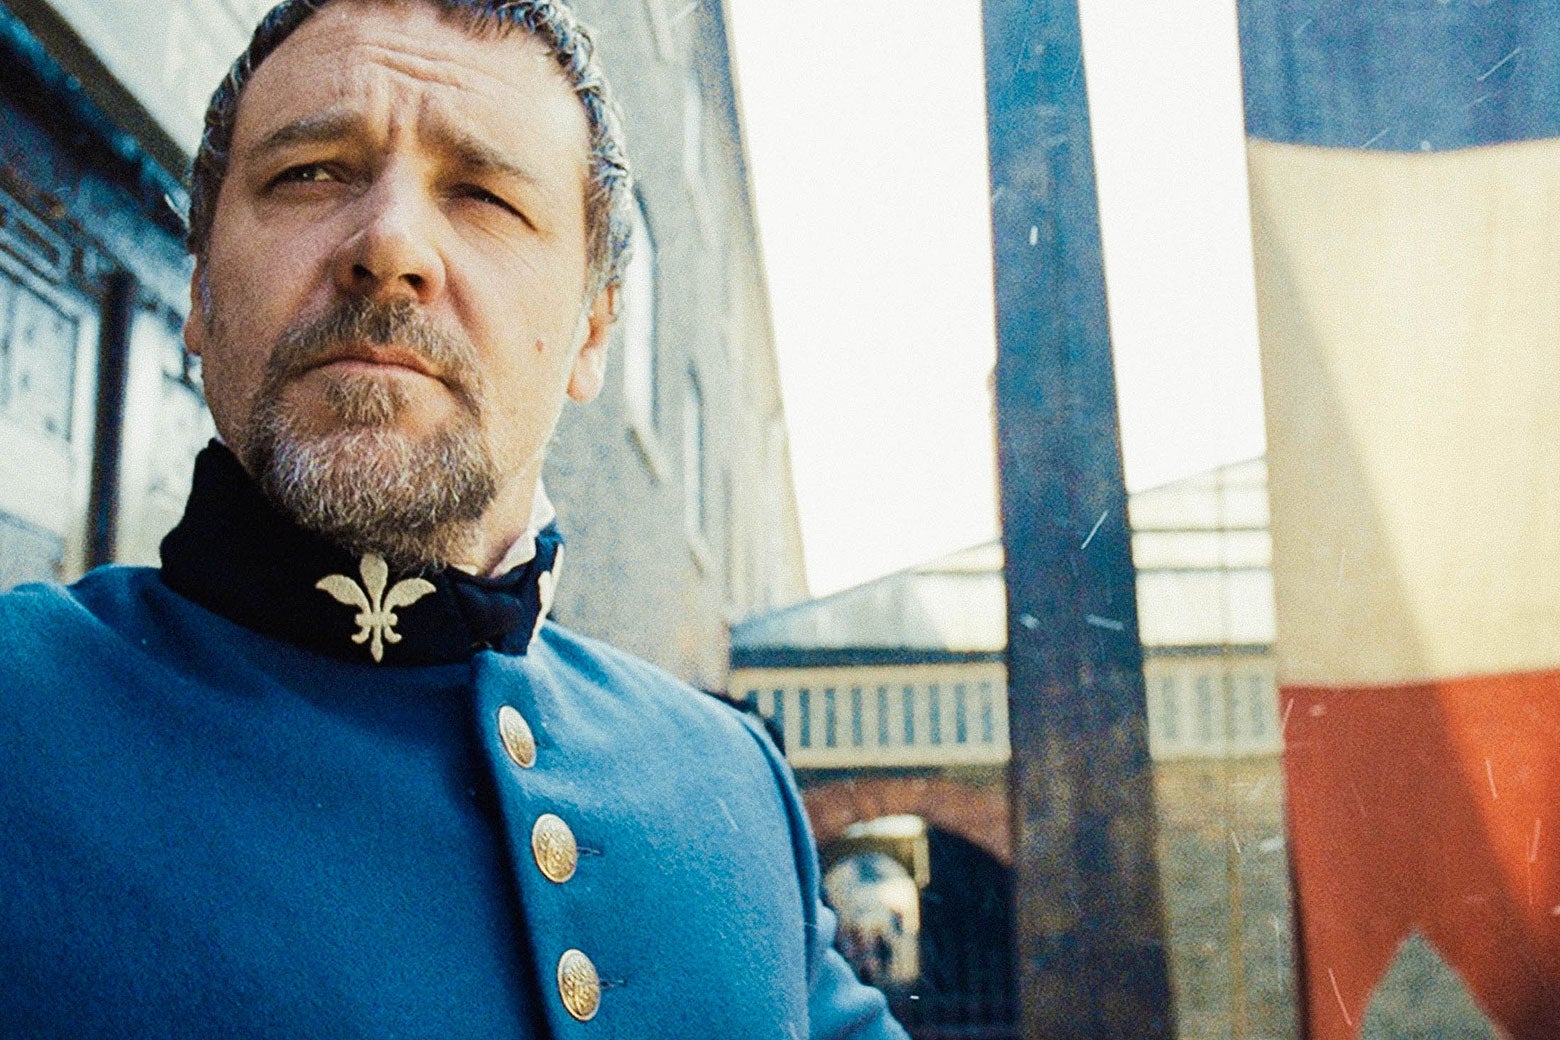 Russell Crowe as Javert in 2012’s Les Misérables.